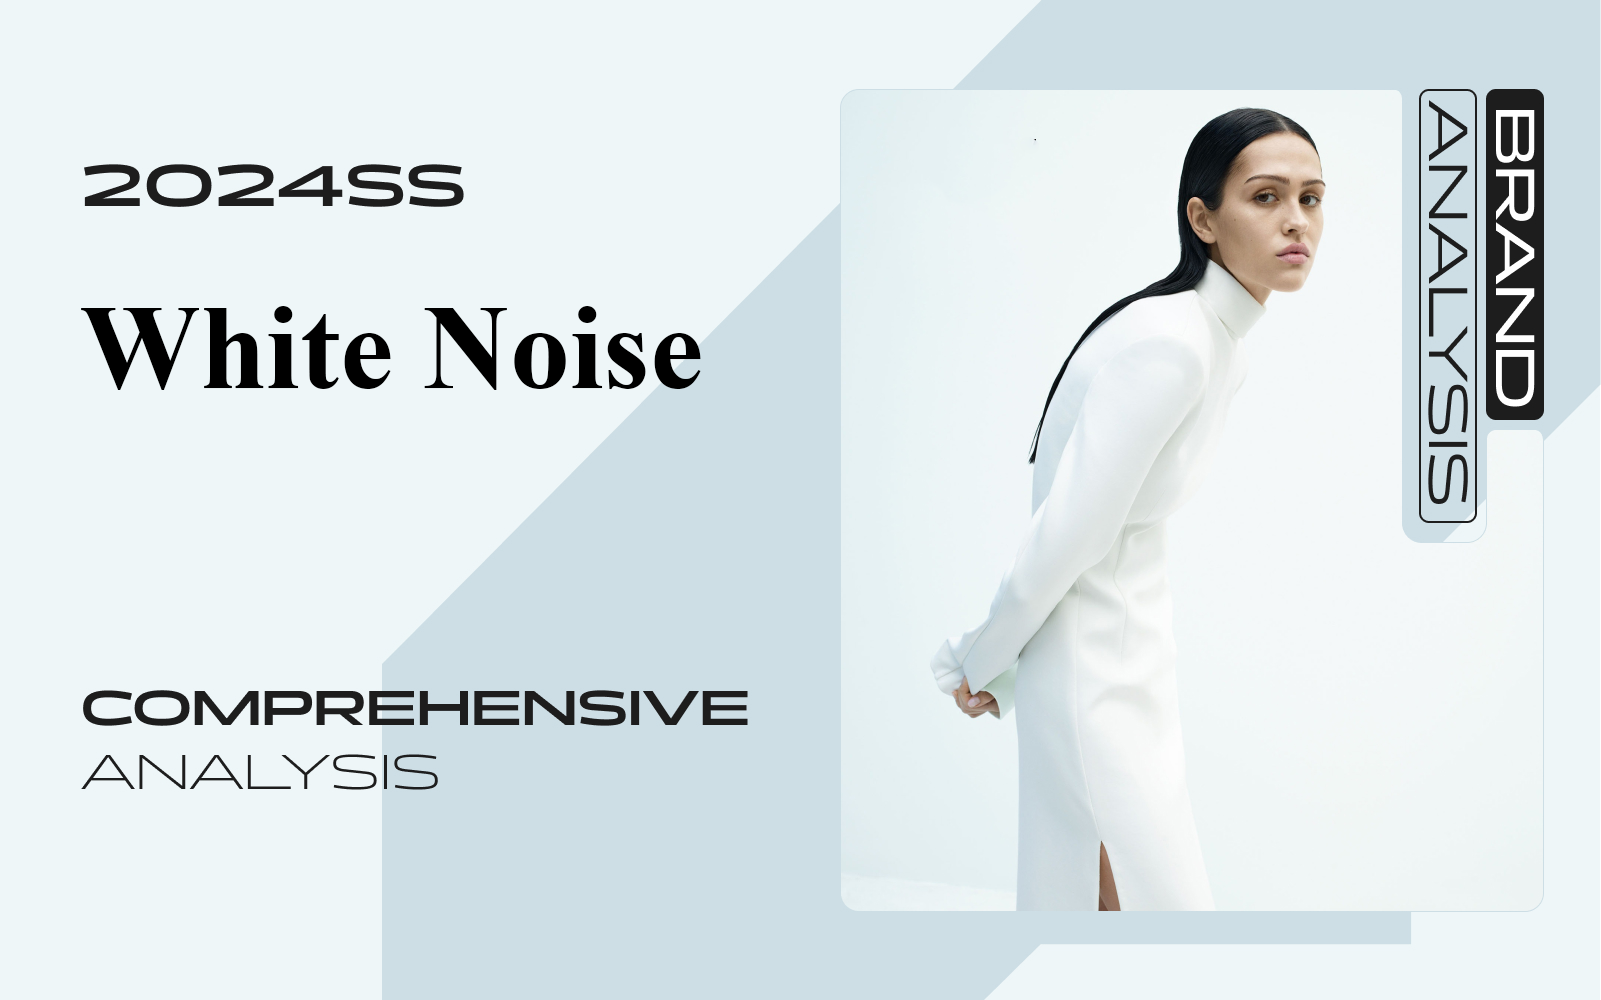 White Noise -- A Comprehensive Analysis of Women's Fashion Designers' Brands